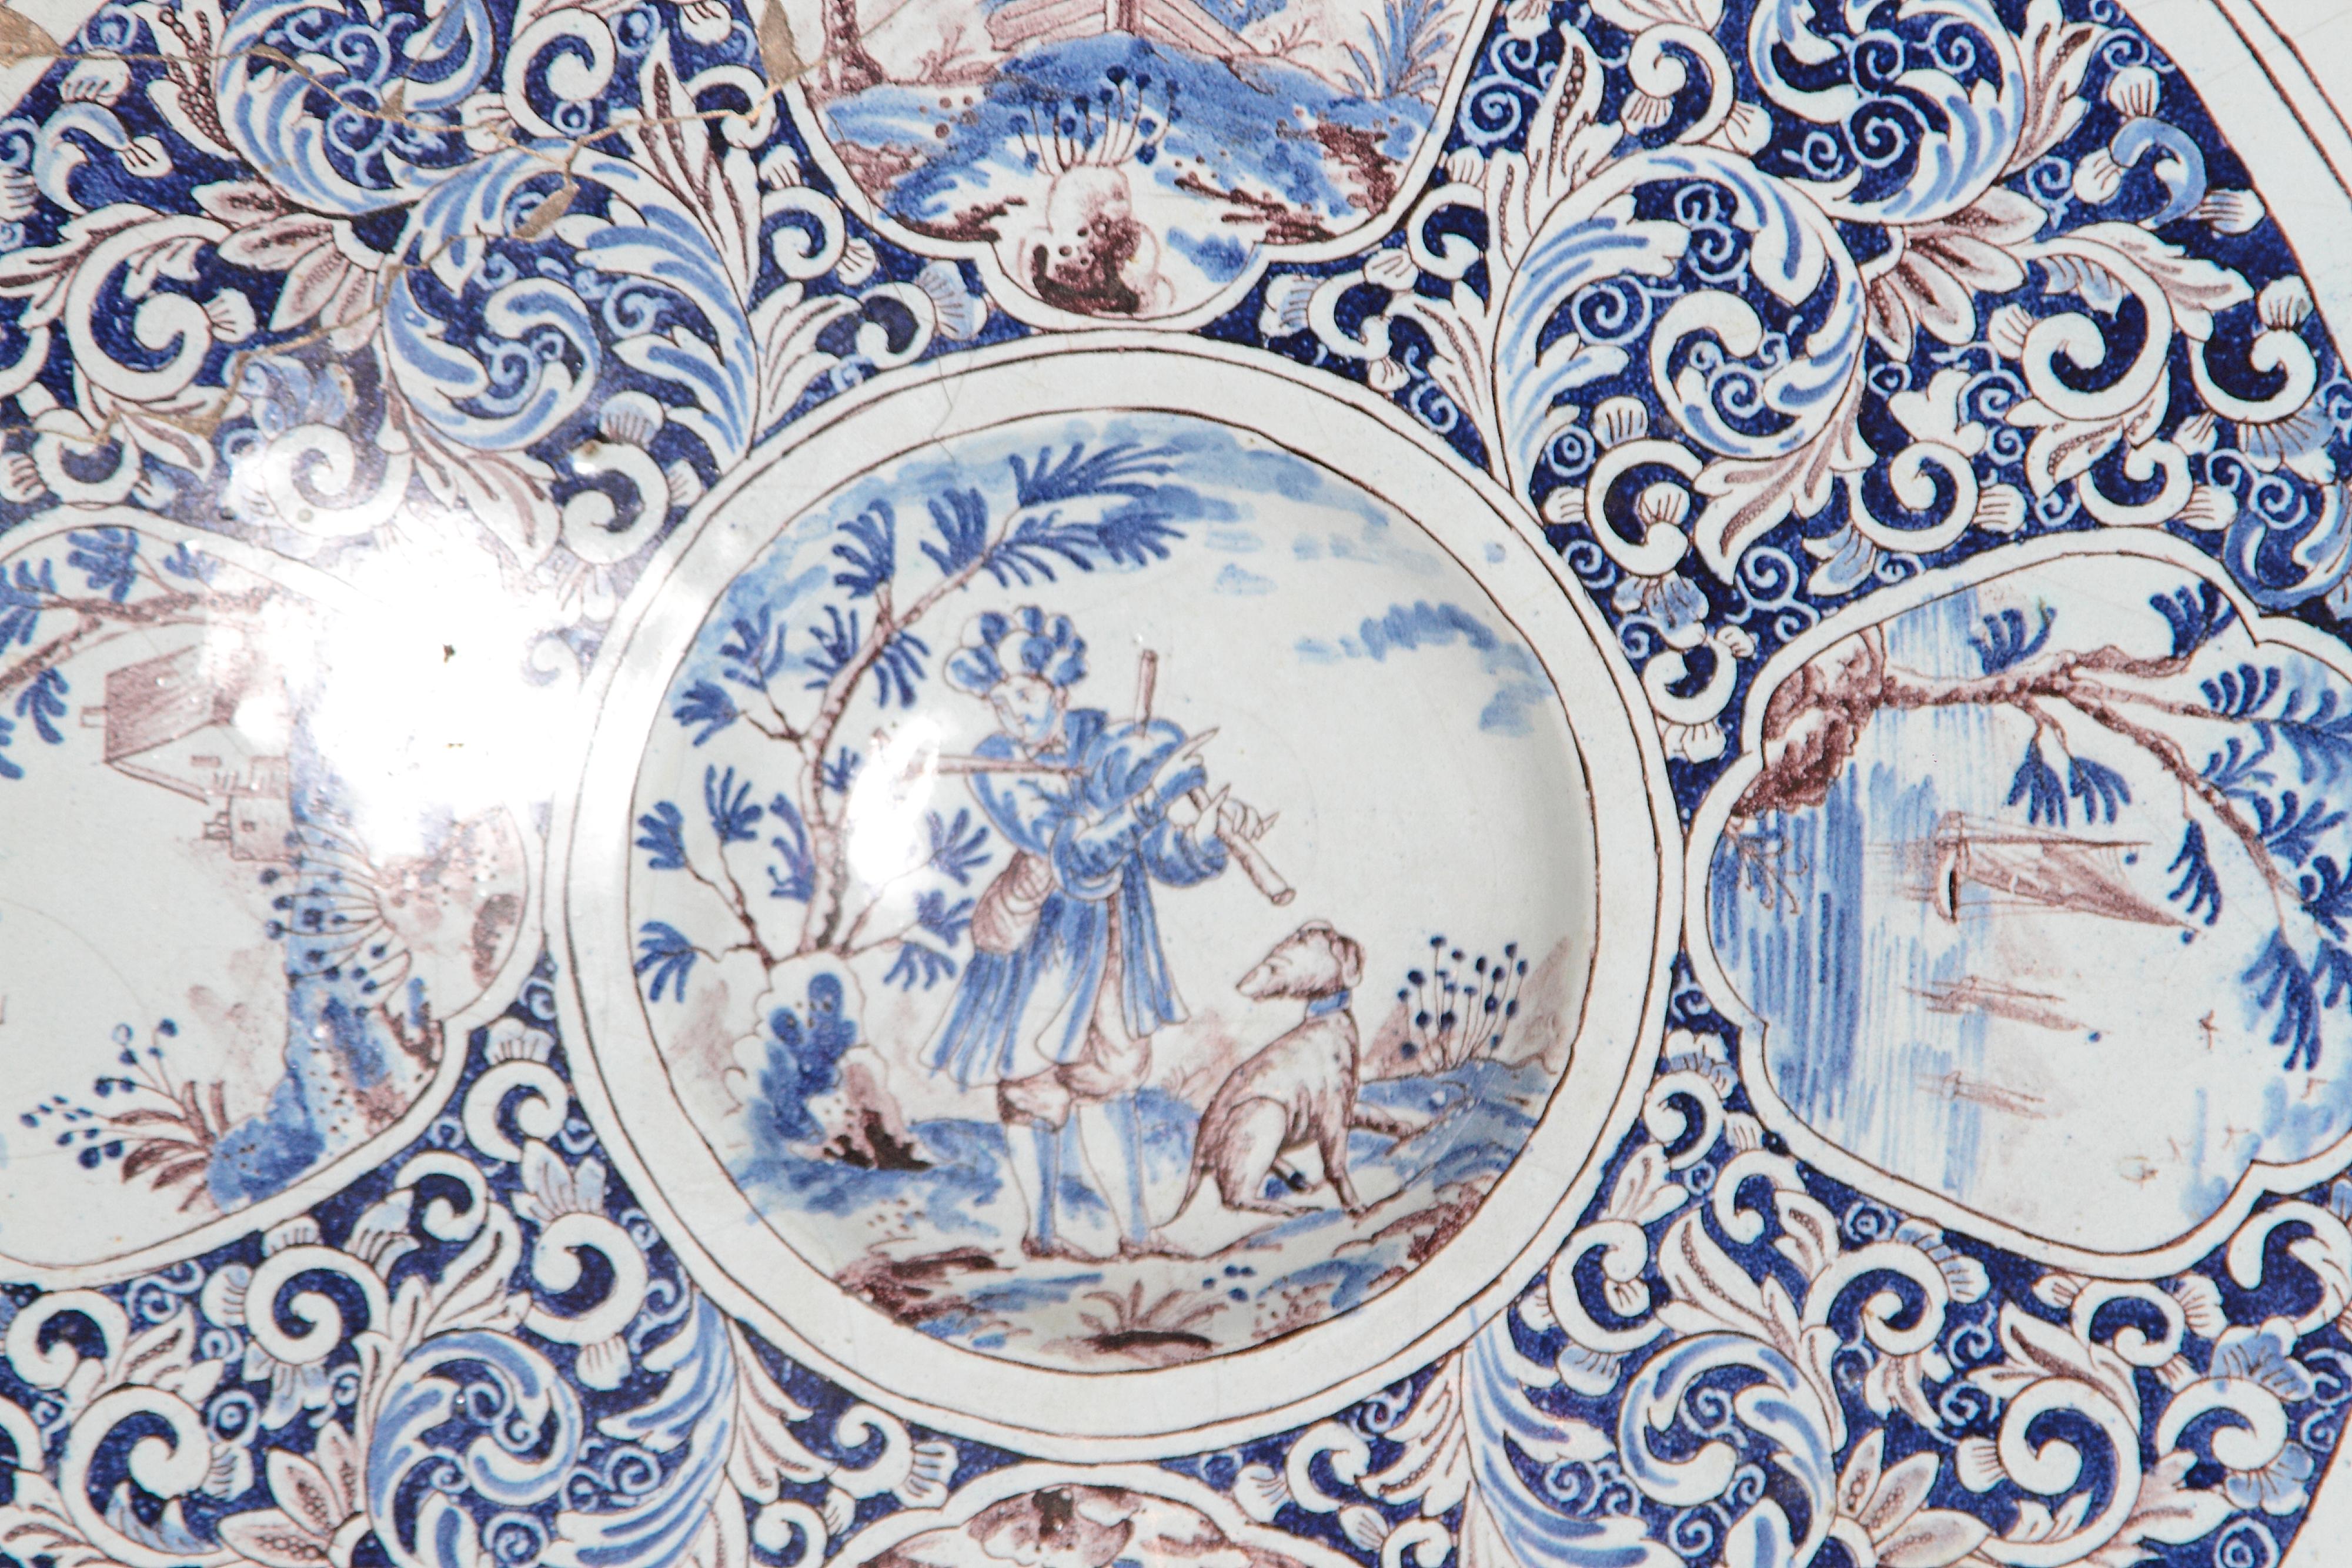 a large round Delft blue and white with brown faience charger with floral cartouches, Holland, 18th century

AS FOUND
old repair (SEE IMAGES) 
chips and worn placed to the edge of the plate